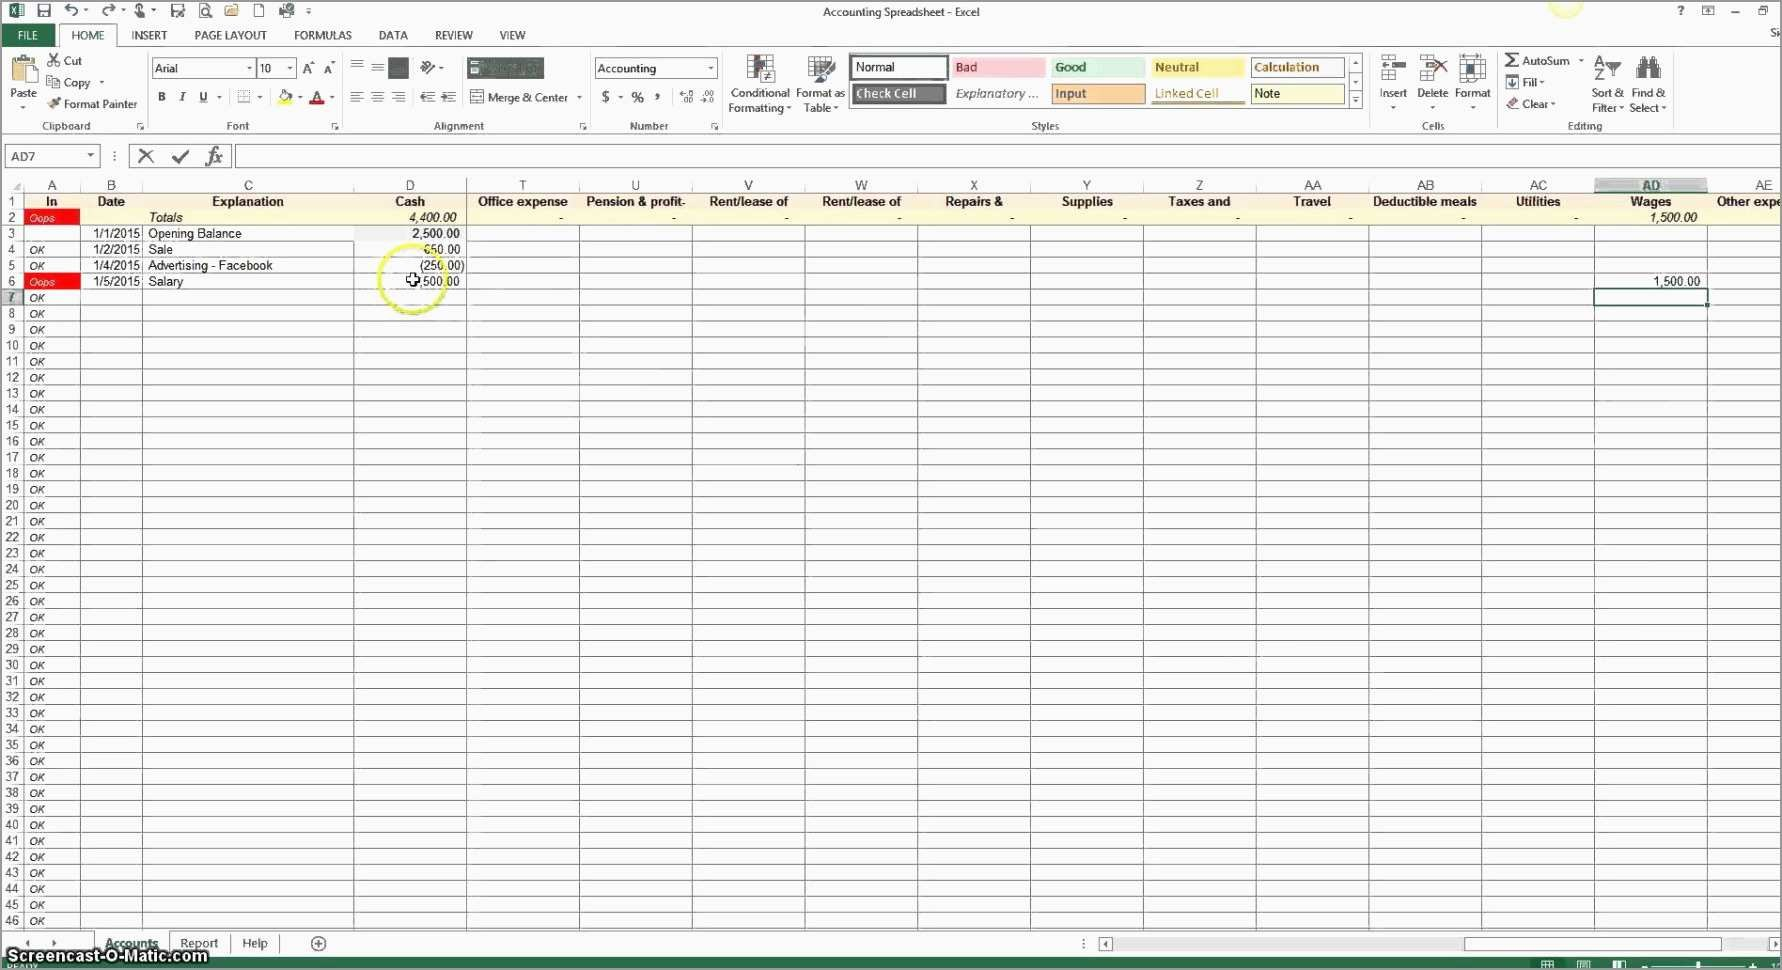 New Free Accounting Spreadsheet Templates For Small Business  Best in Small Business Accounting Spreadsheet Template Free